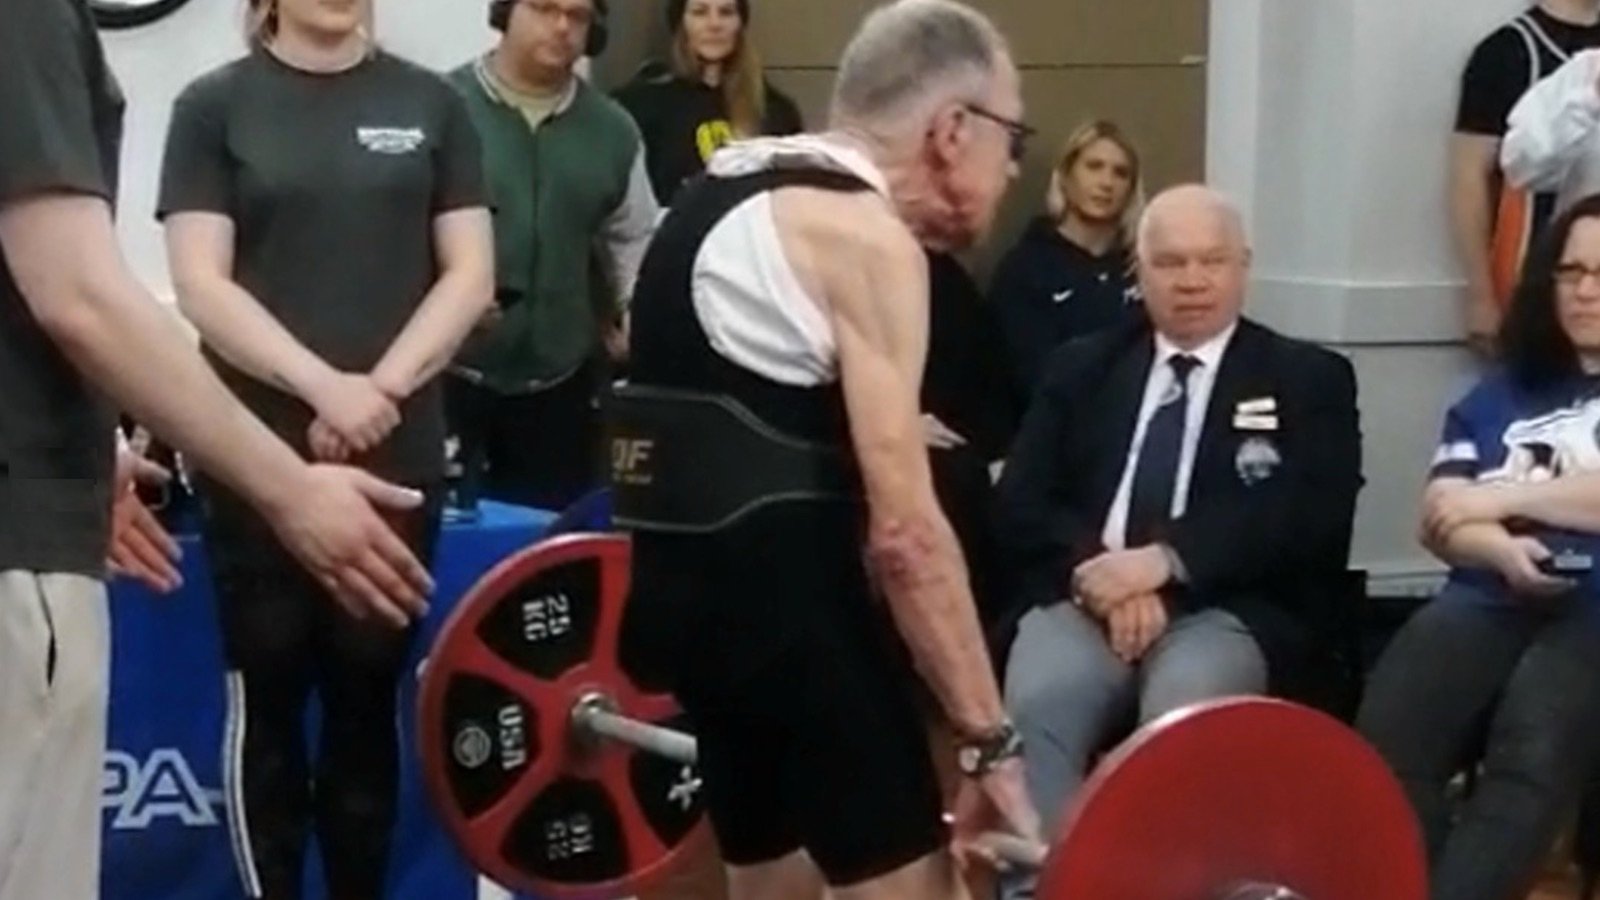 86-year-old-powerlifter-brian-winslow-(60kg)-sets-deadlift-record-of-775-kilograms-(170.8-pounds)-–-breaking-muscle